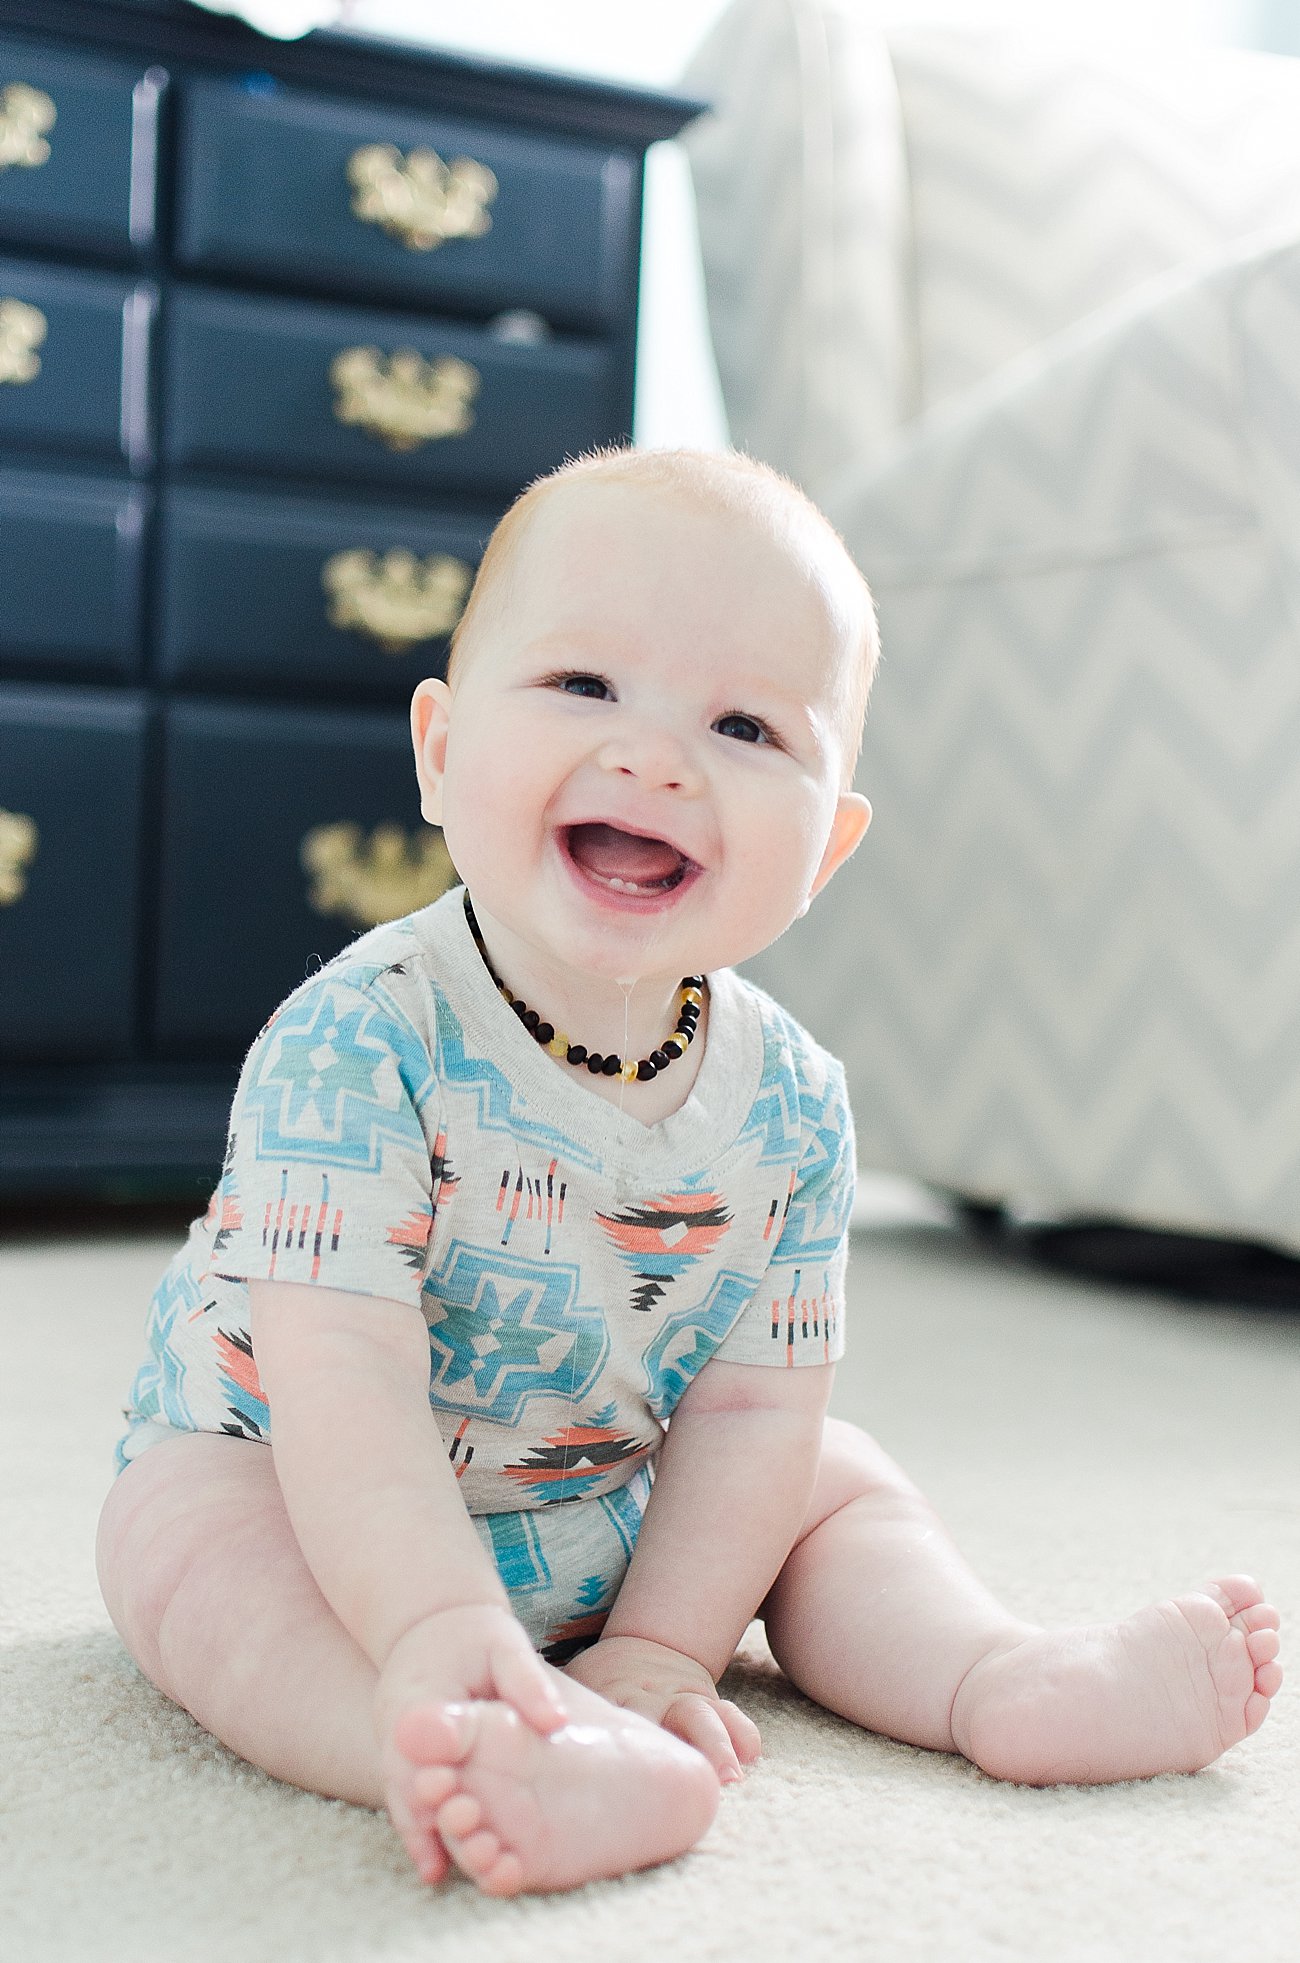 Three Tips for Getting the Most Out of Baby's Wardrobe with Carter's (8)